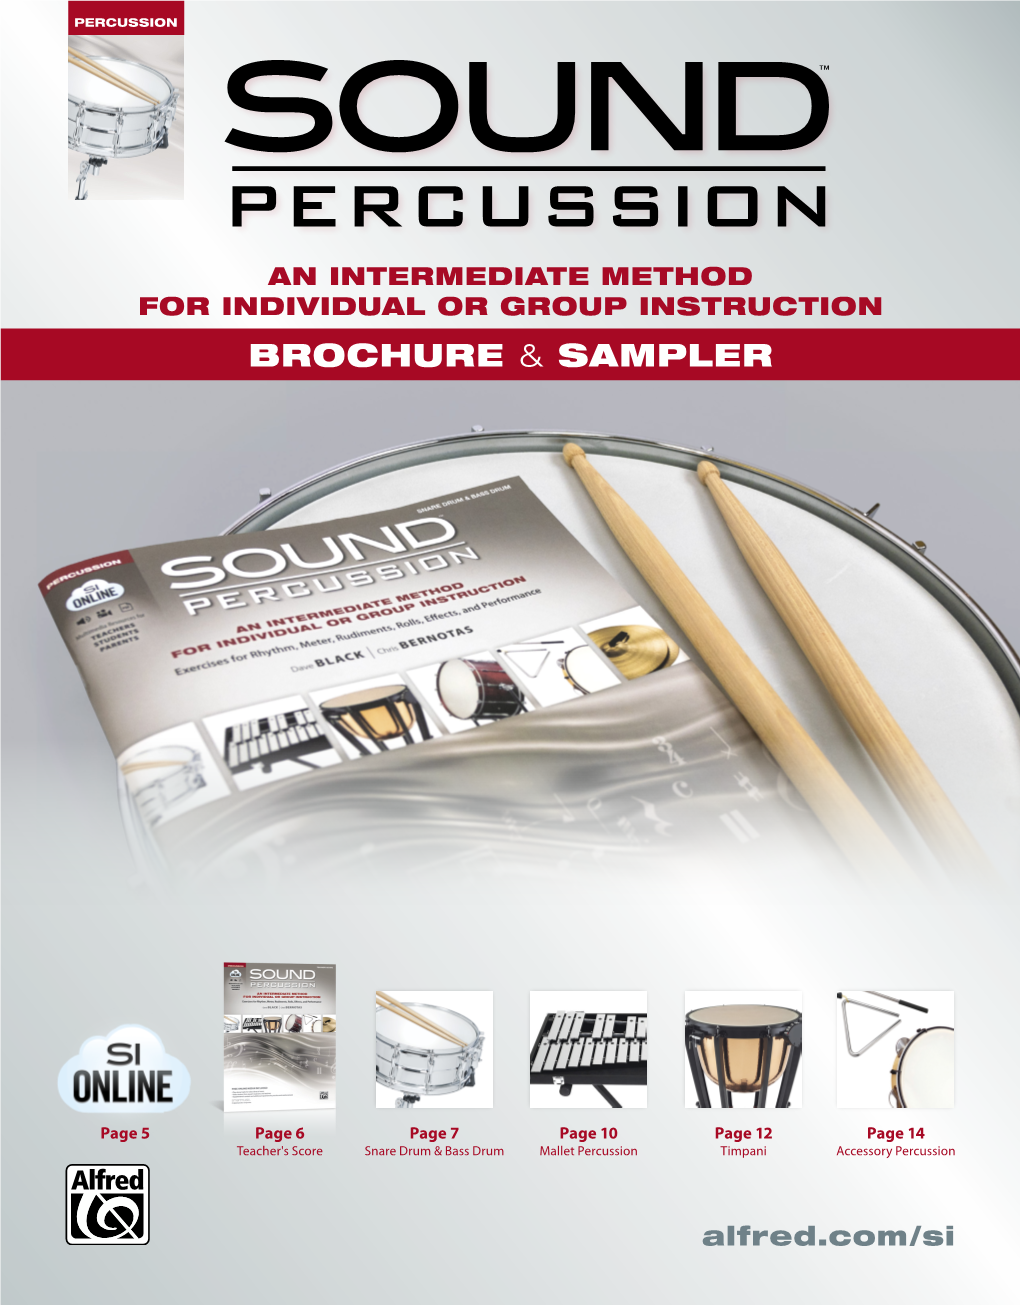 Why Sound Percussion?